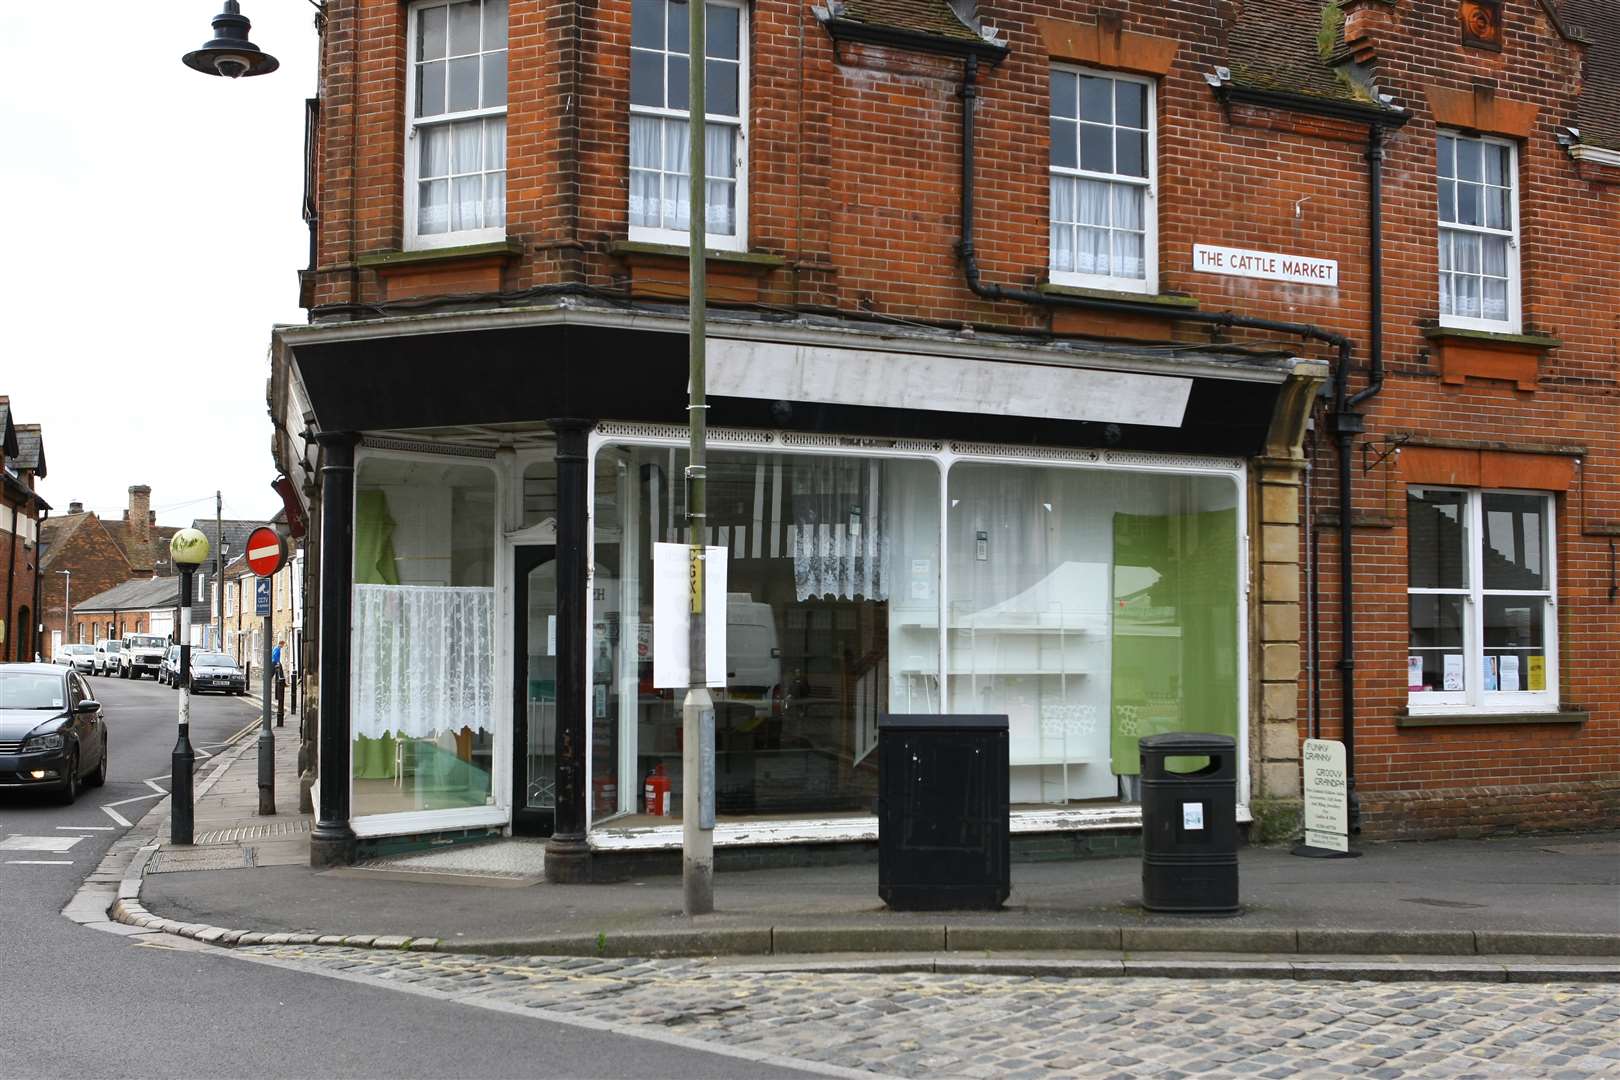 Residents are not happy this historic shop could be turned into a Costa